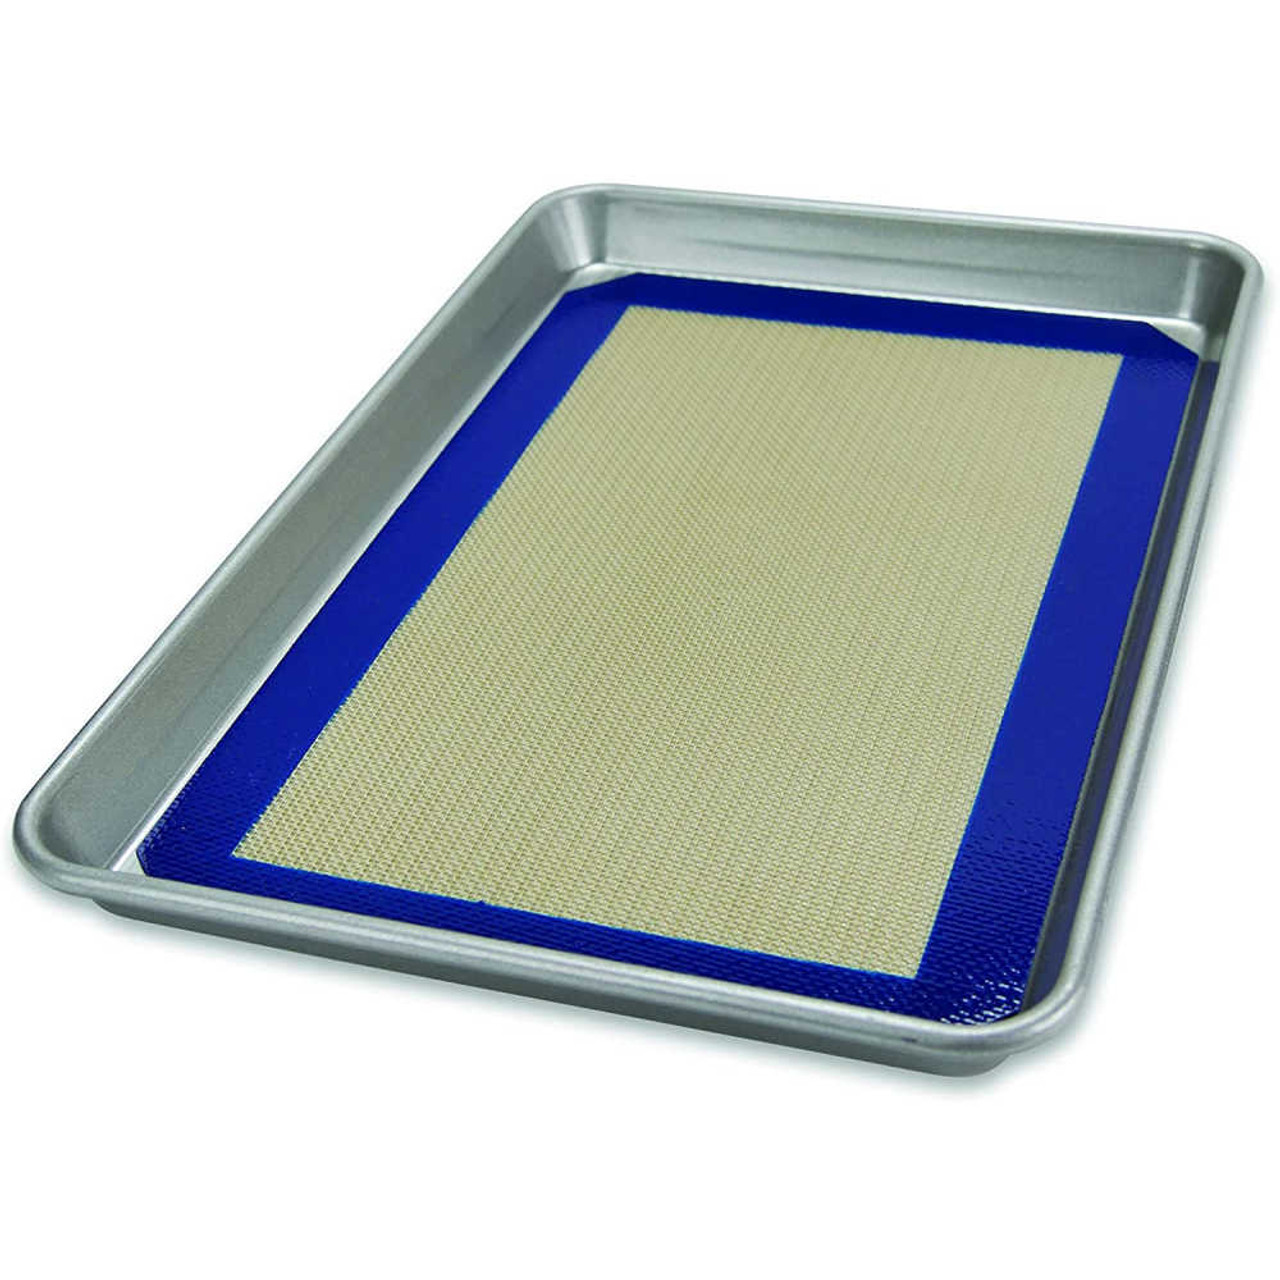 https://cdn11.bigcommerce.com/s-hccytny0od/images/stencil/1280x1280/products/4742/19301/USA_Pan_Jelly_Roll_Pan_and_Baking_Mat_Set_1__63805.1652456297.jpg?c=2?imbypass=on